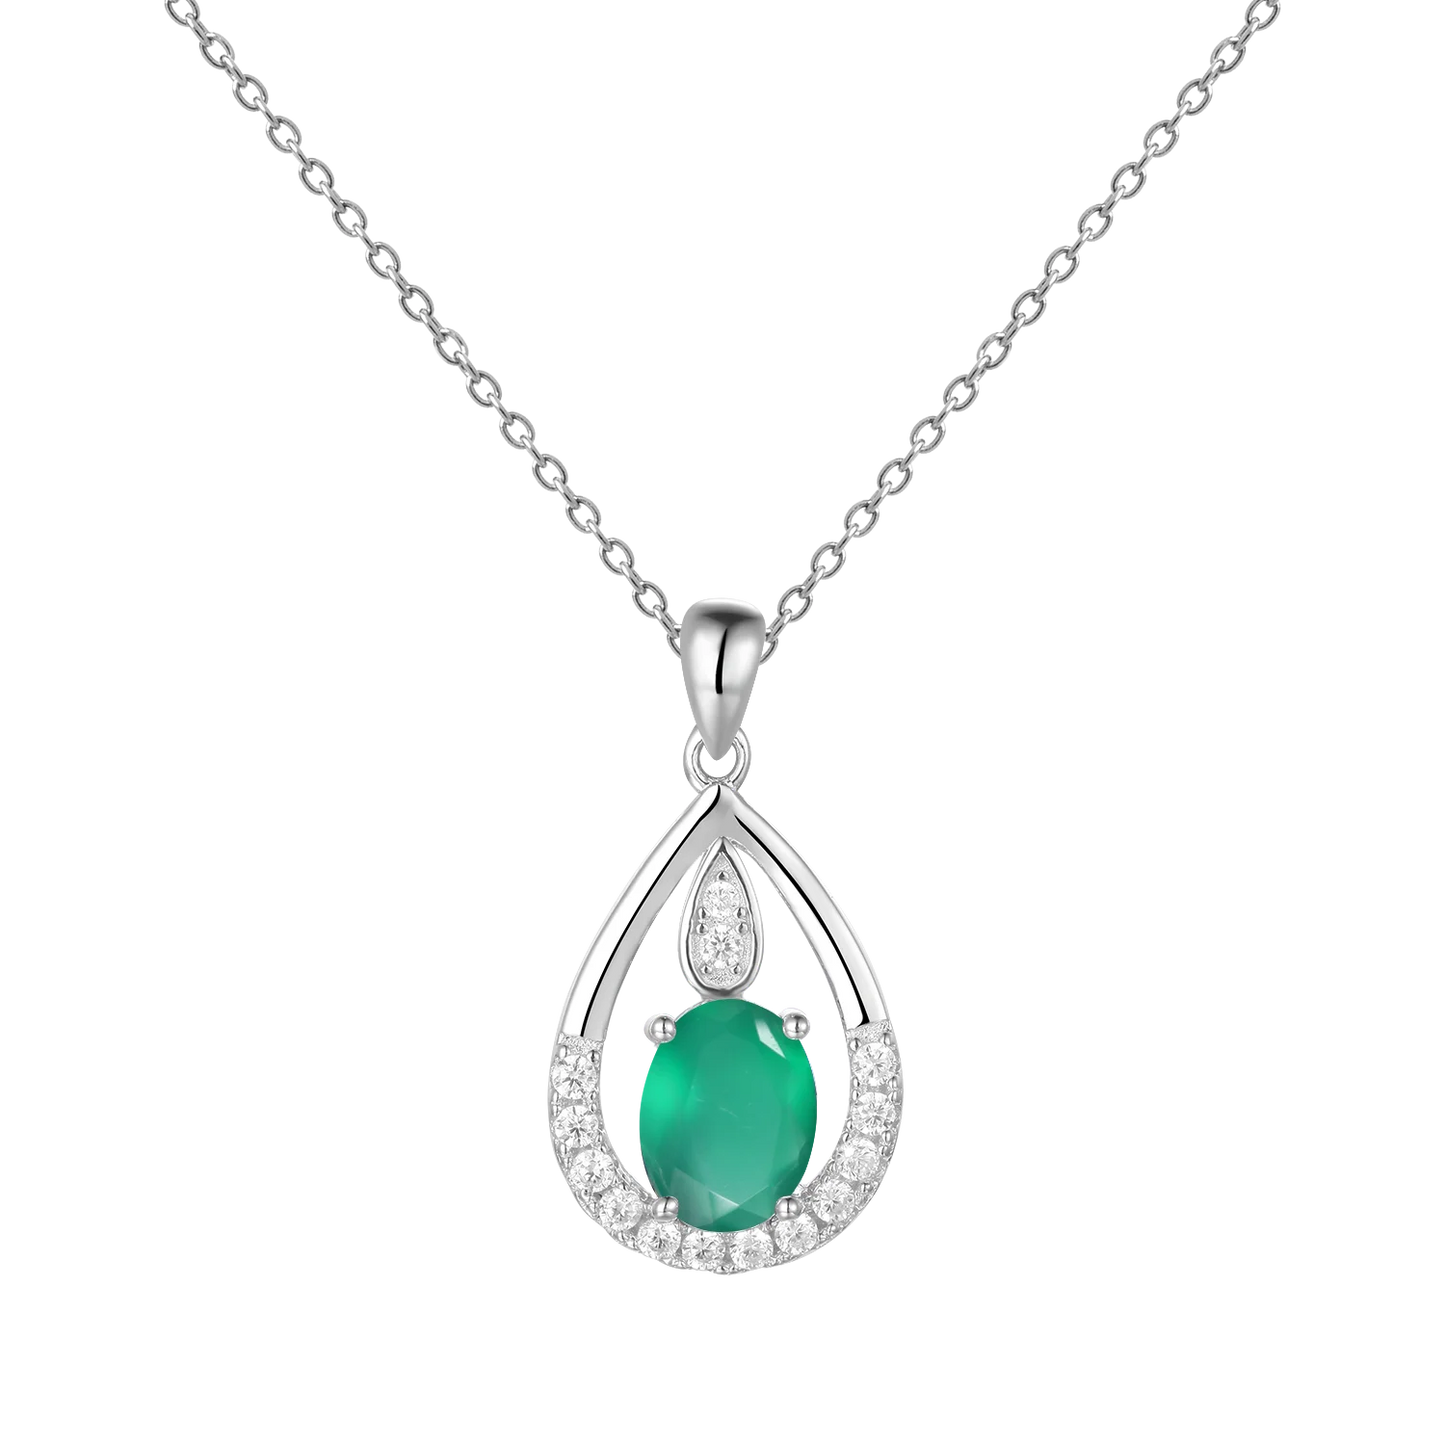 Gem's Ballet December Birthstone Topaz Necklace 6x8mm Oval Pink Topaz Pendant Necklace in 925 Sterling Silver with 18" Chain Green Agate